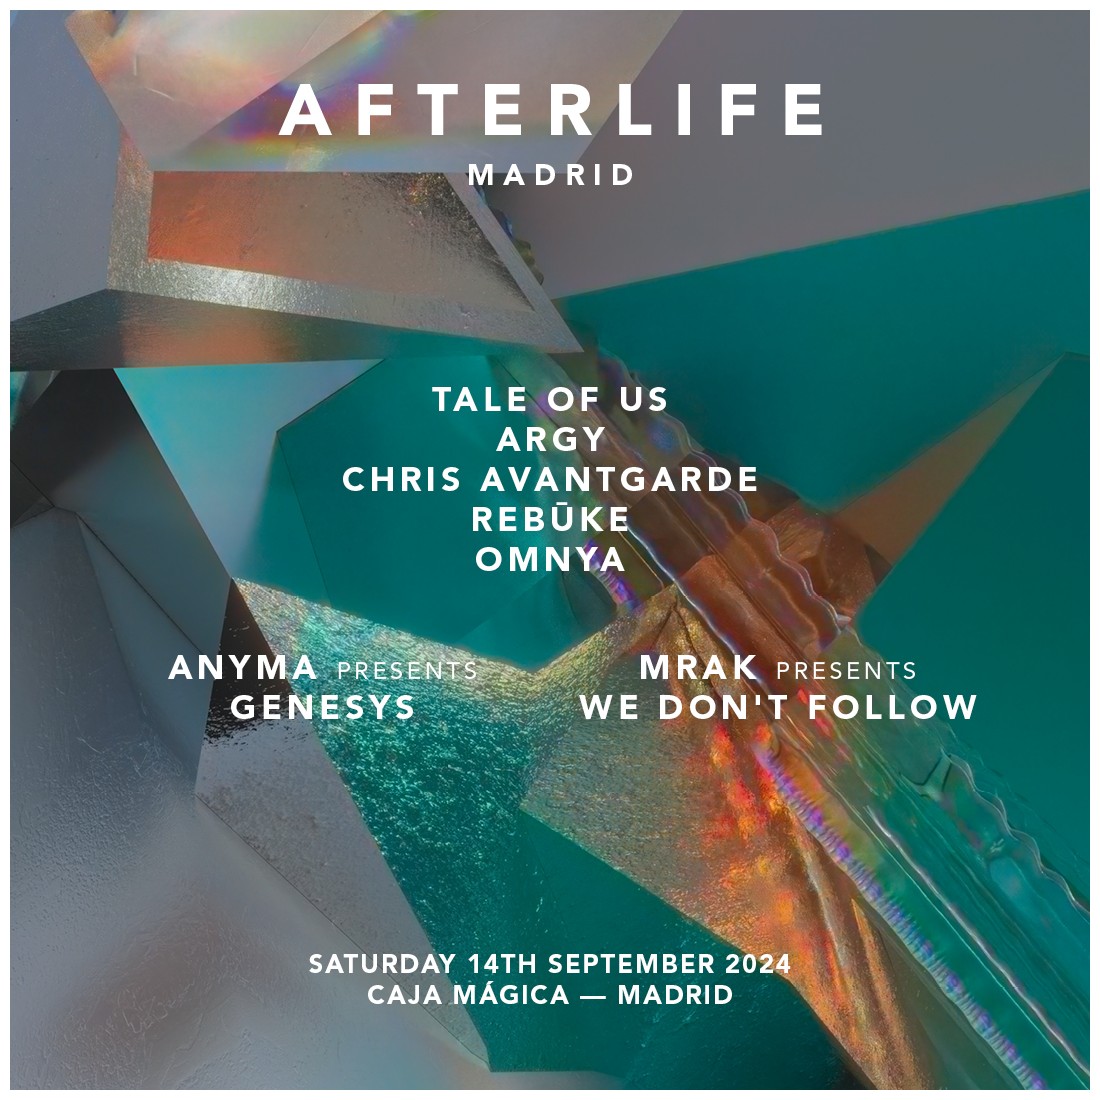 AFTERLIFE MADRID Septiembre 14 - VIP